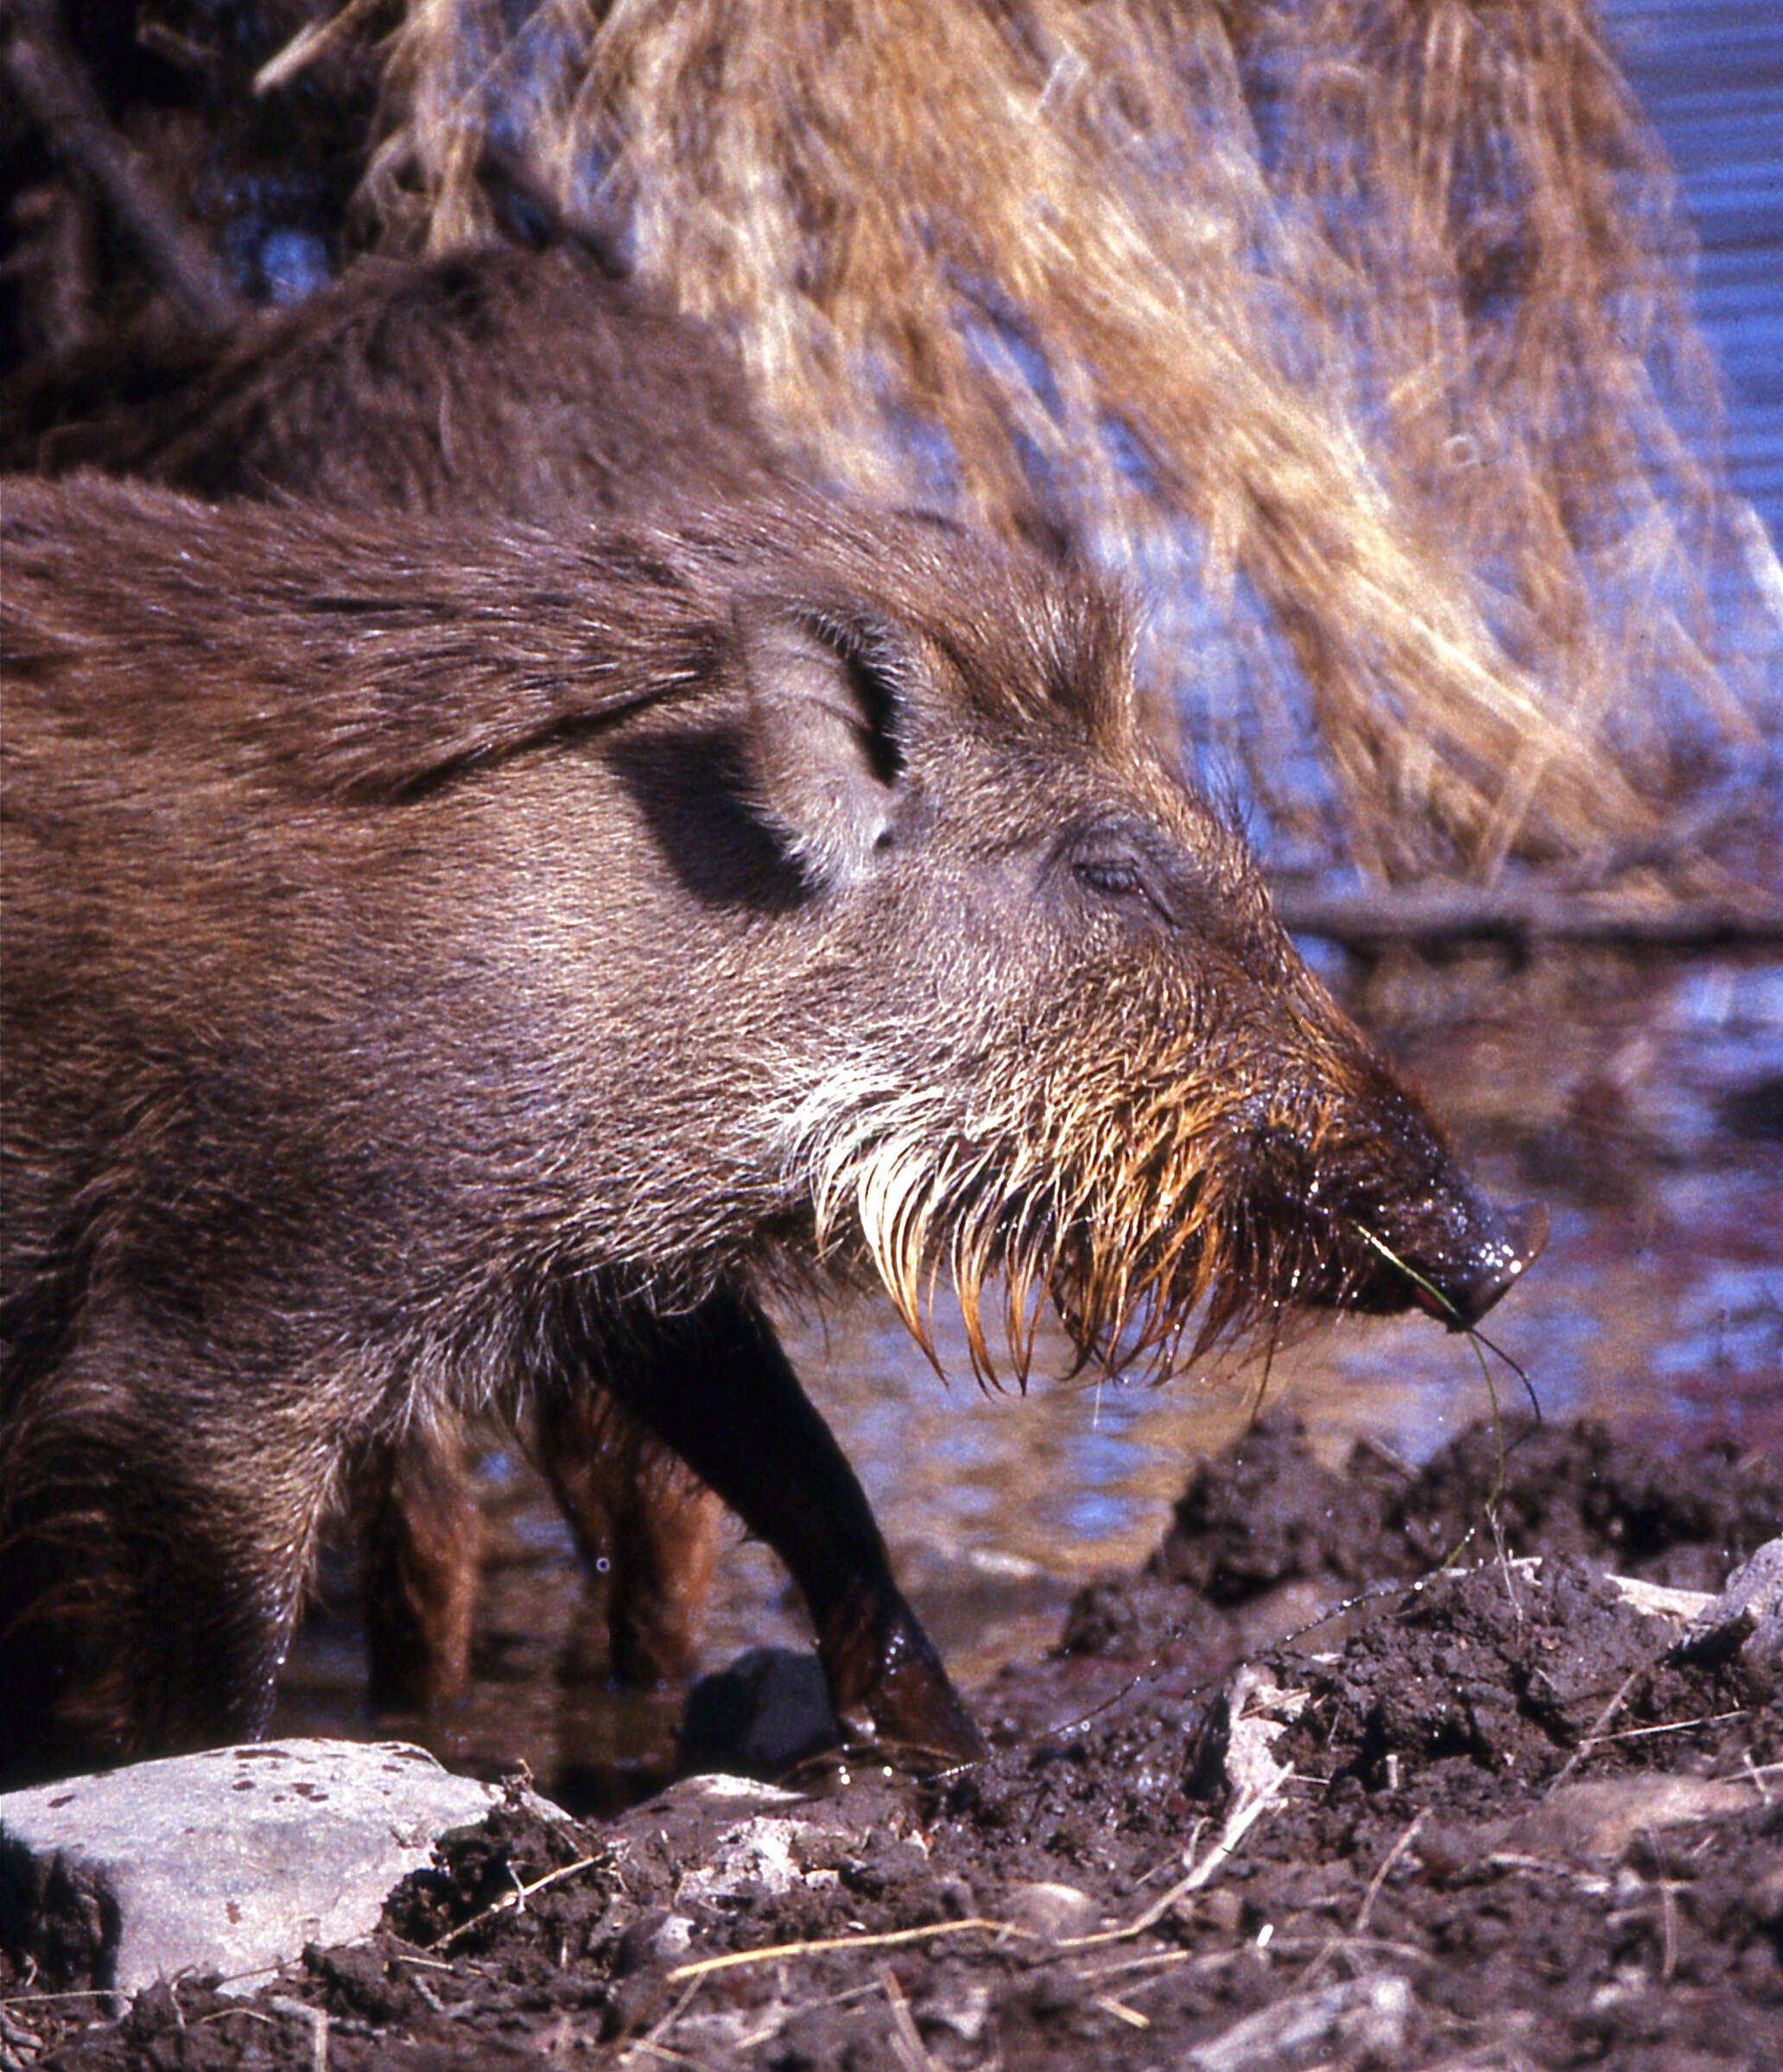 Image of Indian boar